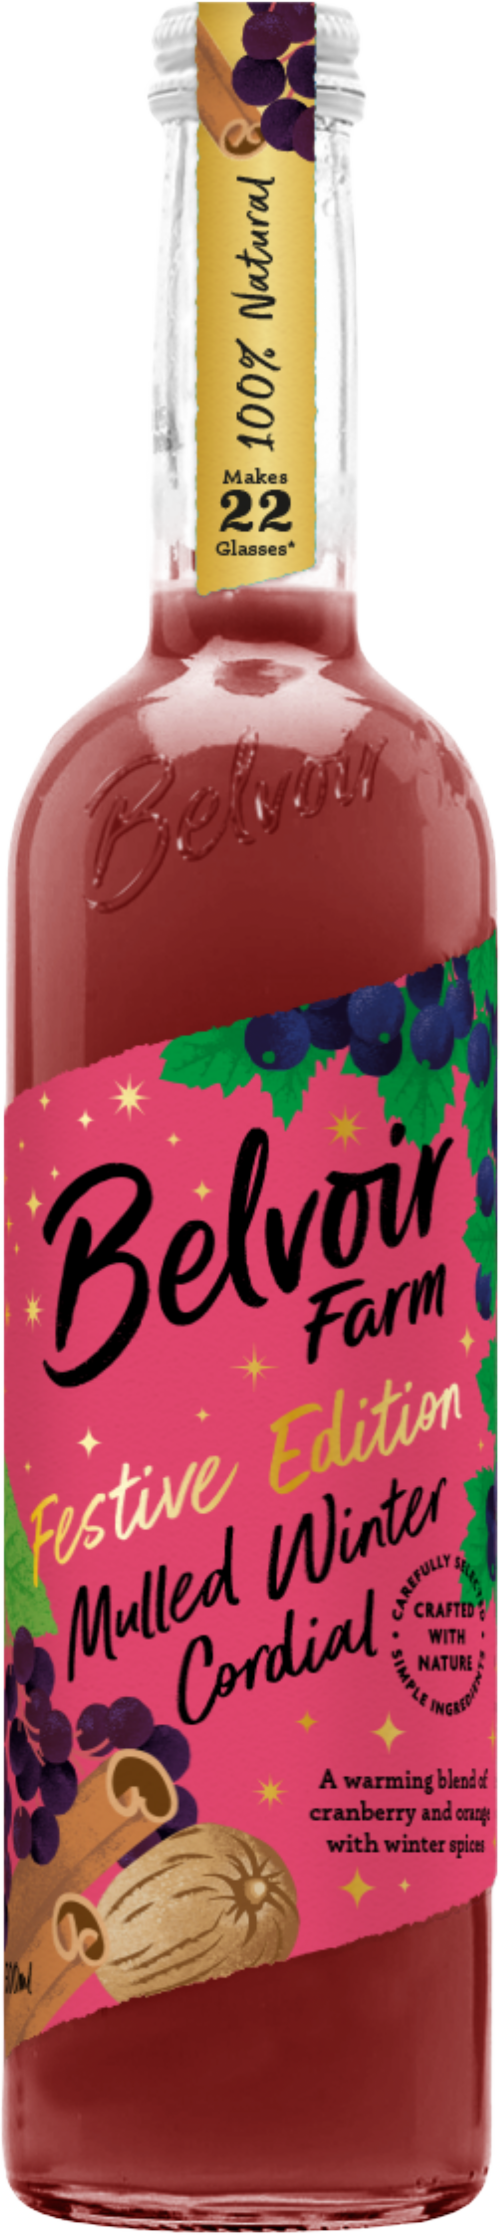 BELVOIR Festive Edition Mulled Winter Cordial 50cl